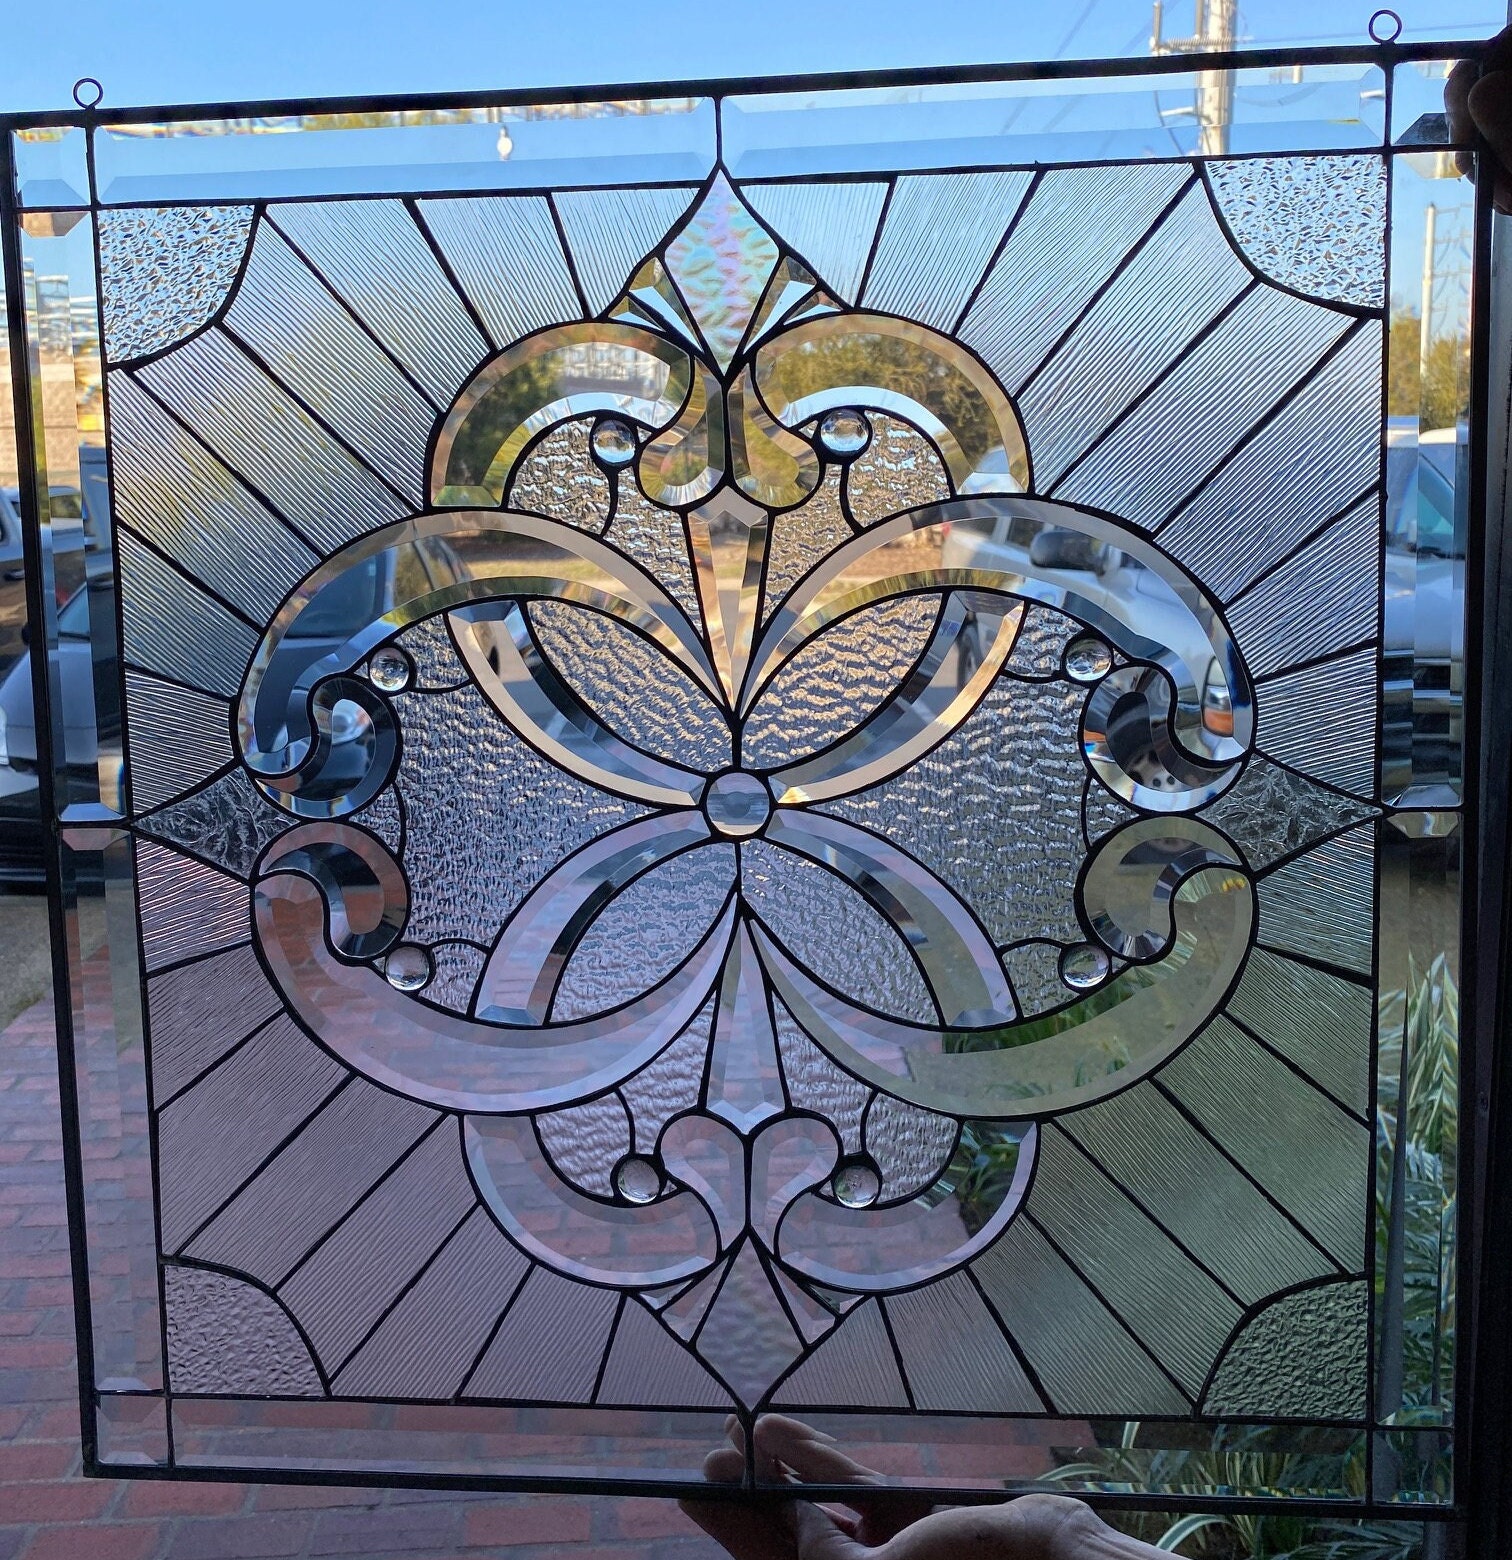 How to make a beveled stained glass panel the easy way - B+C Guides